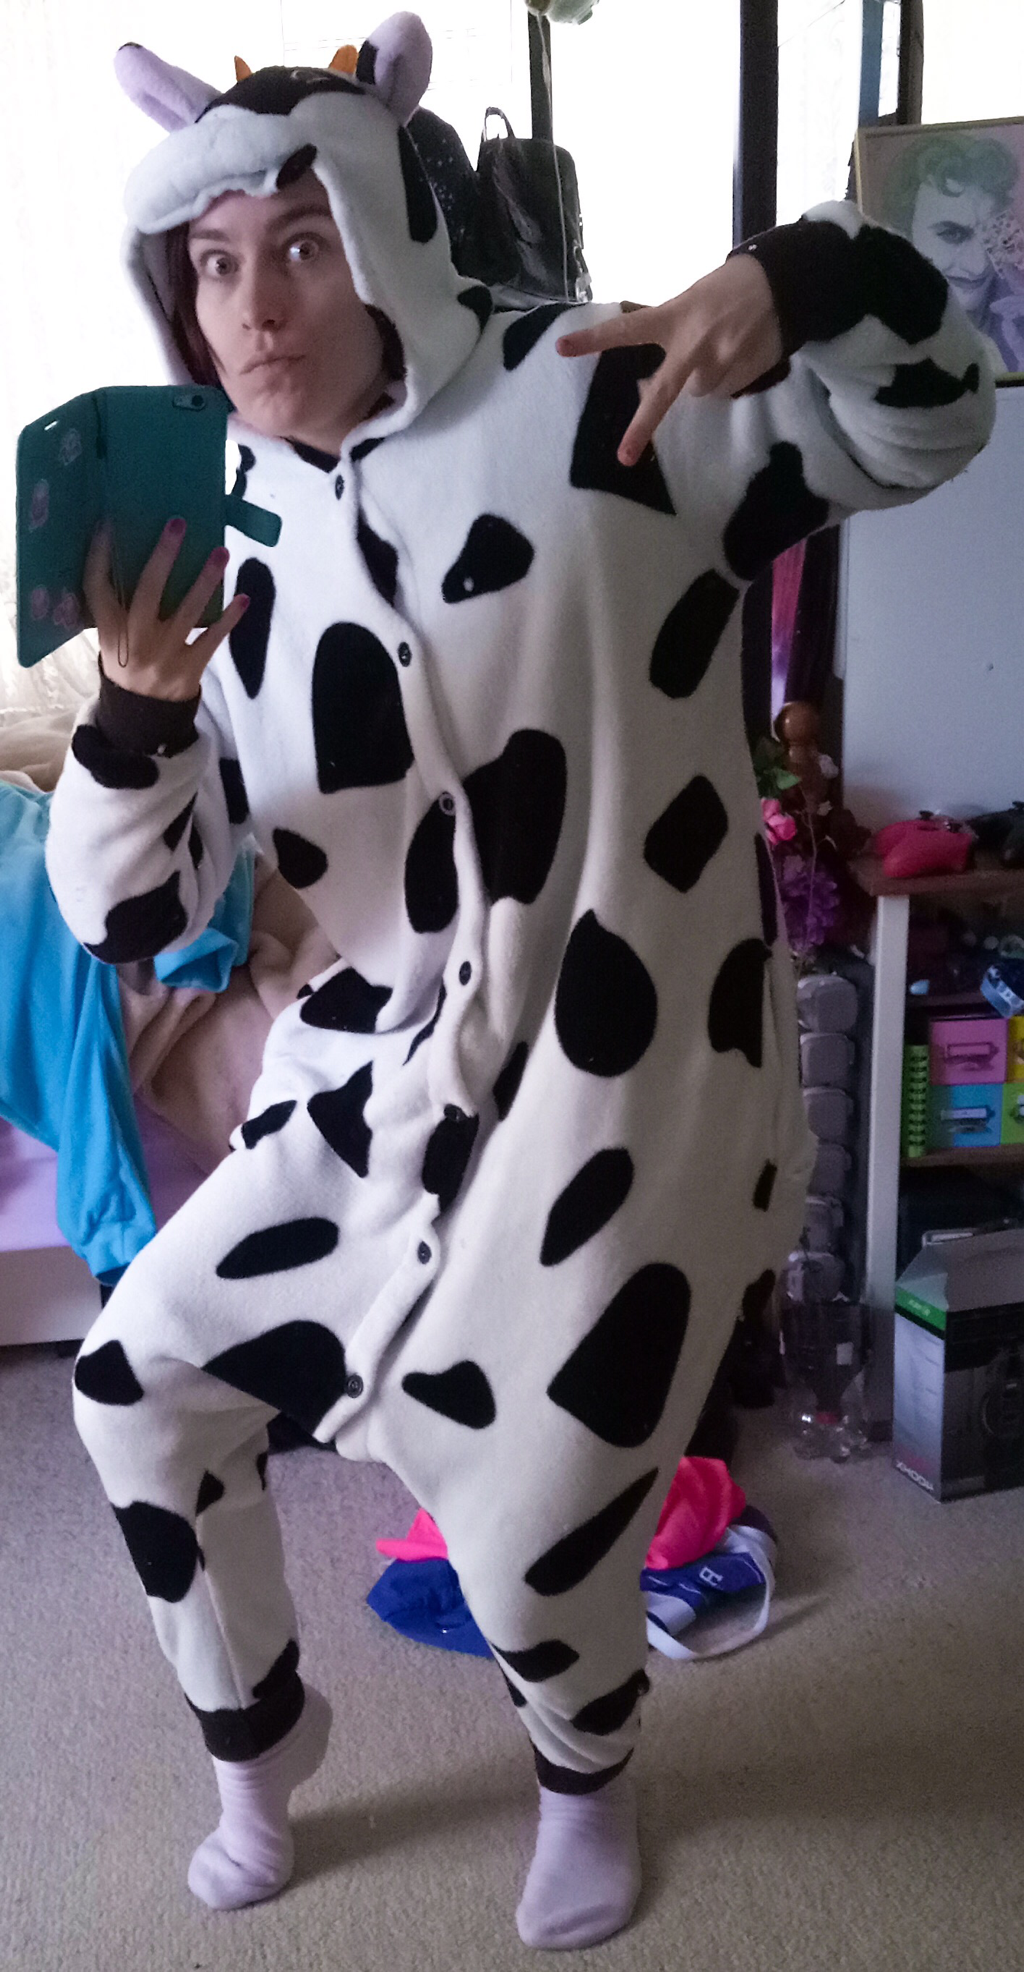 Jessica wearing the cow onesie and taking a selfie